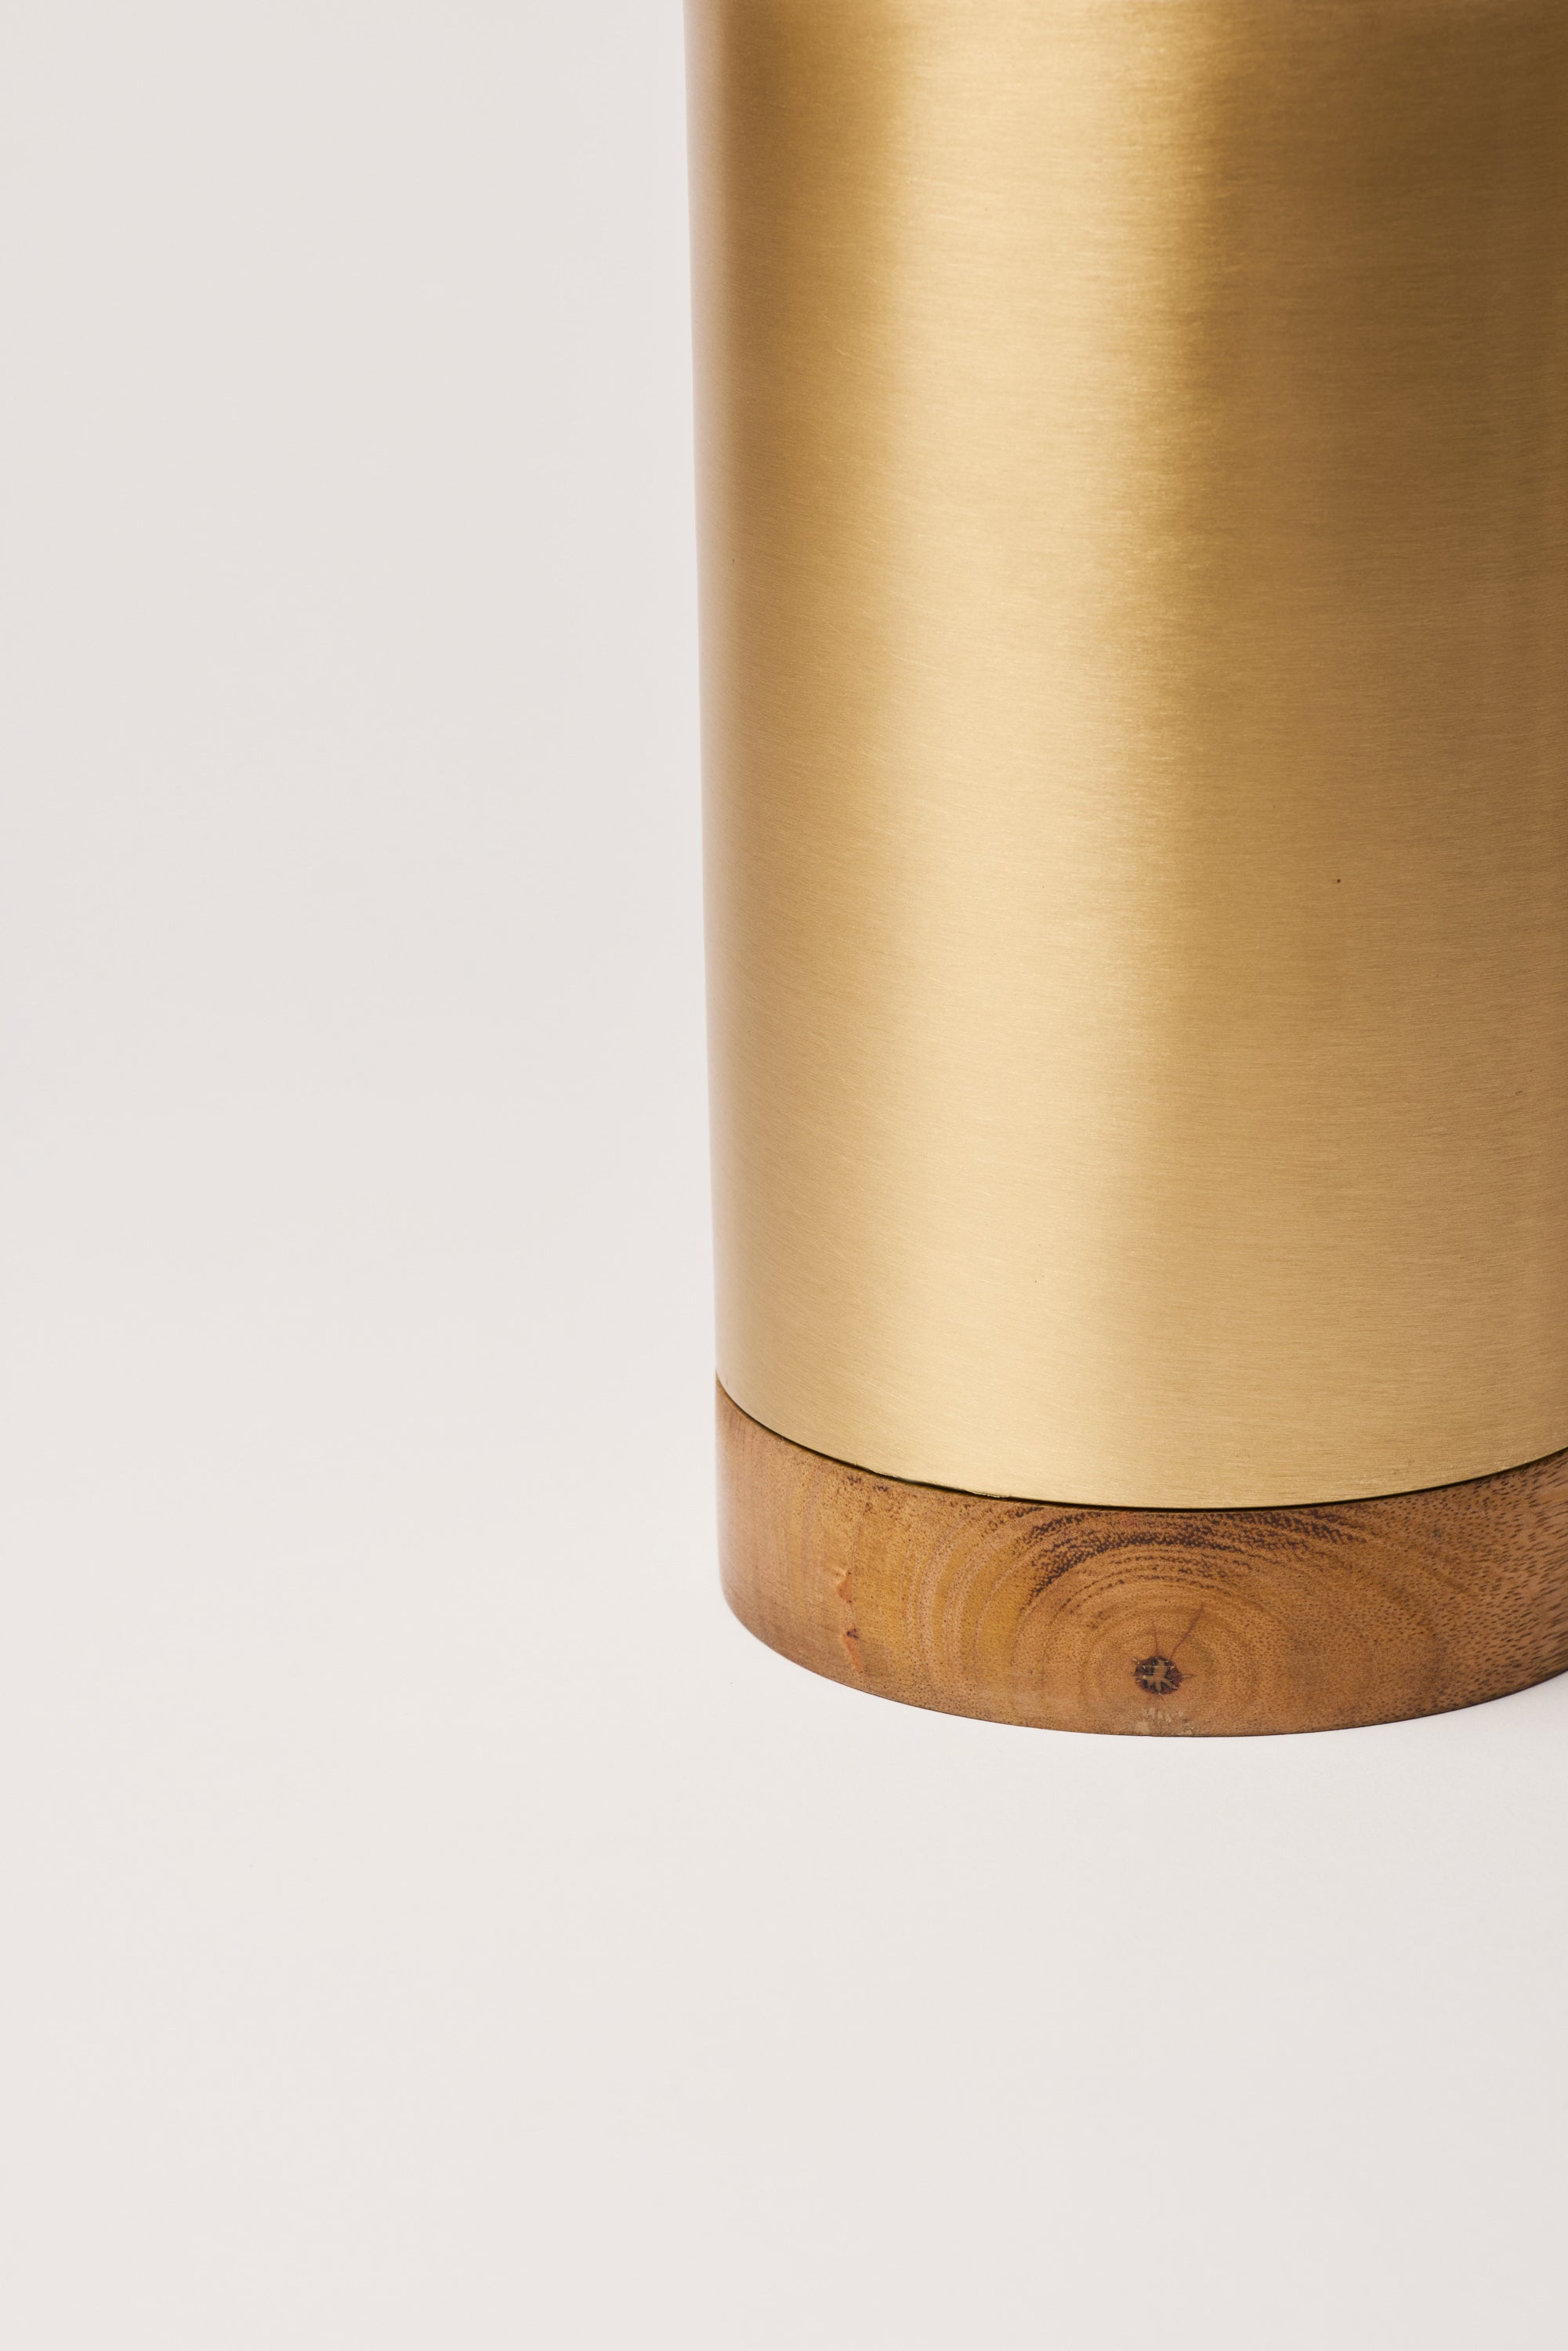 Fleck Brass and Wood Wine Chiller detail